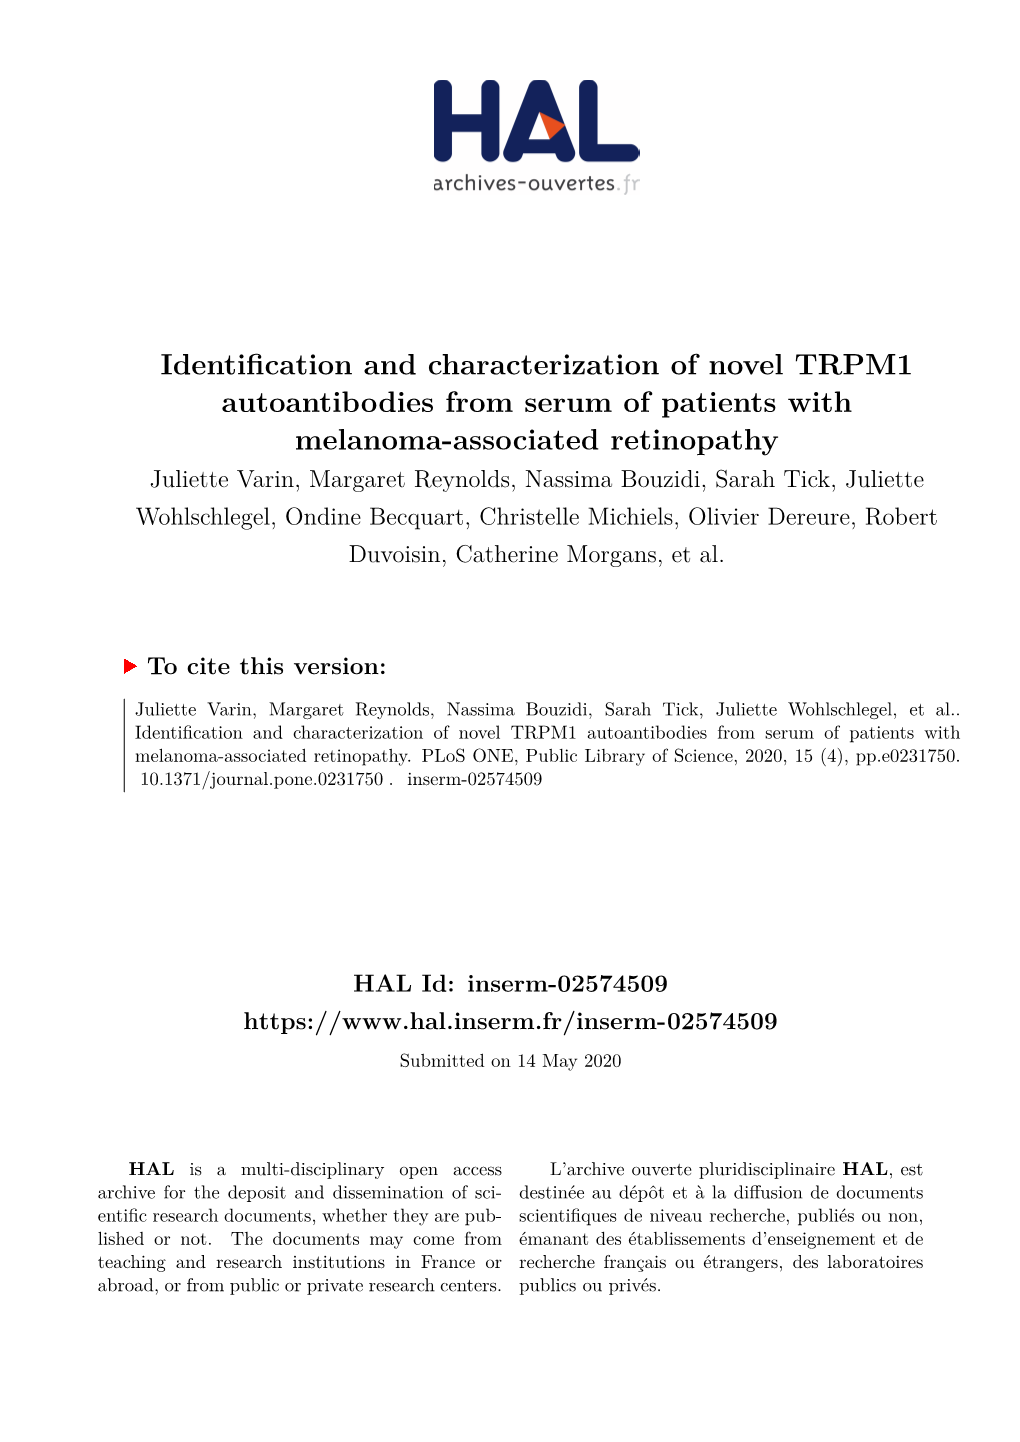 Identification and Characterization of Novel TRPM1 Autoantibodies From